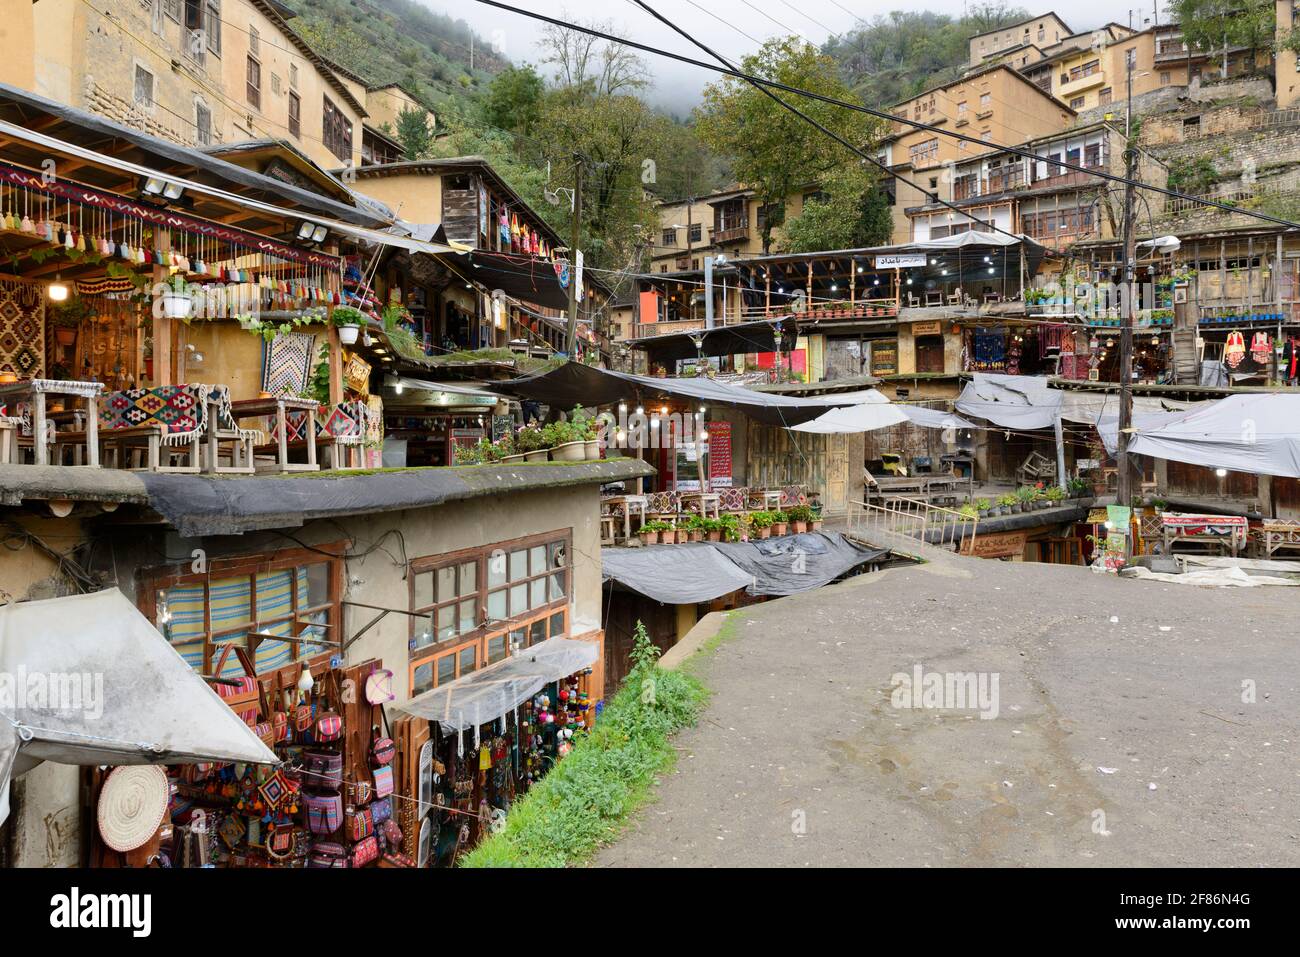 A collection of café's on the roofs of underlying houses in the historical village Masuleh, Gilan Province, Iran Stock Photo